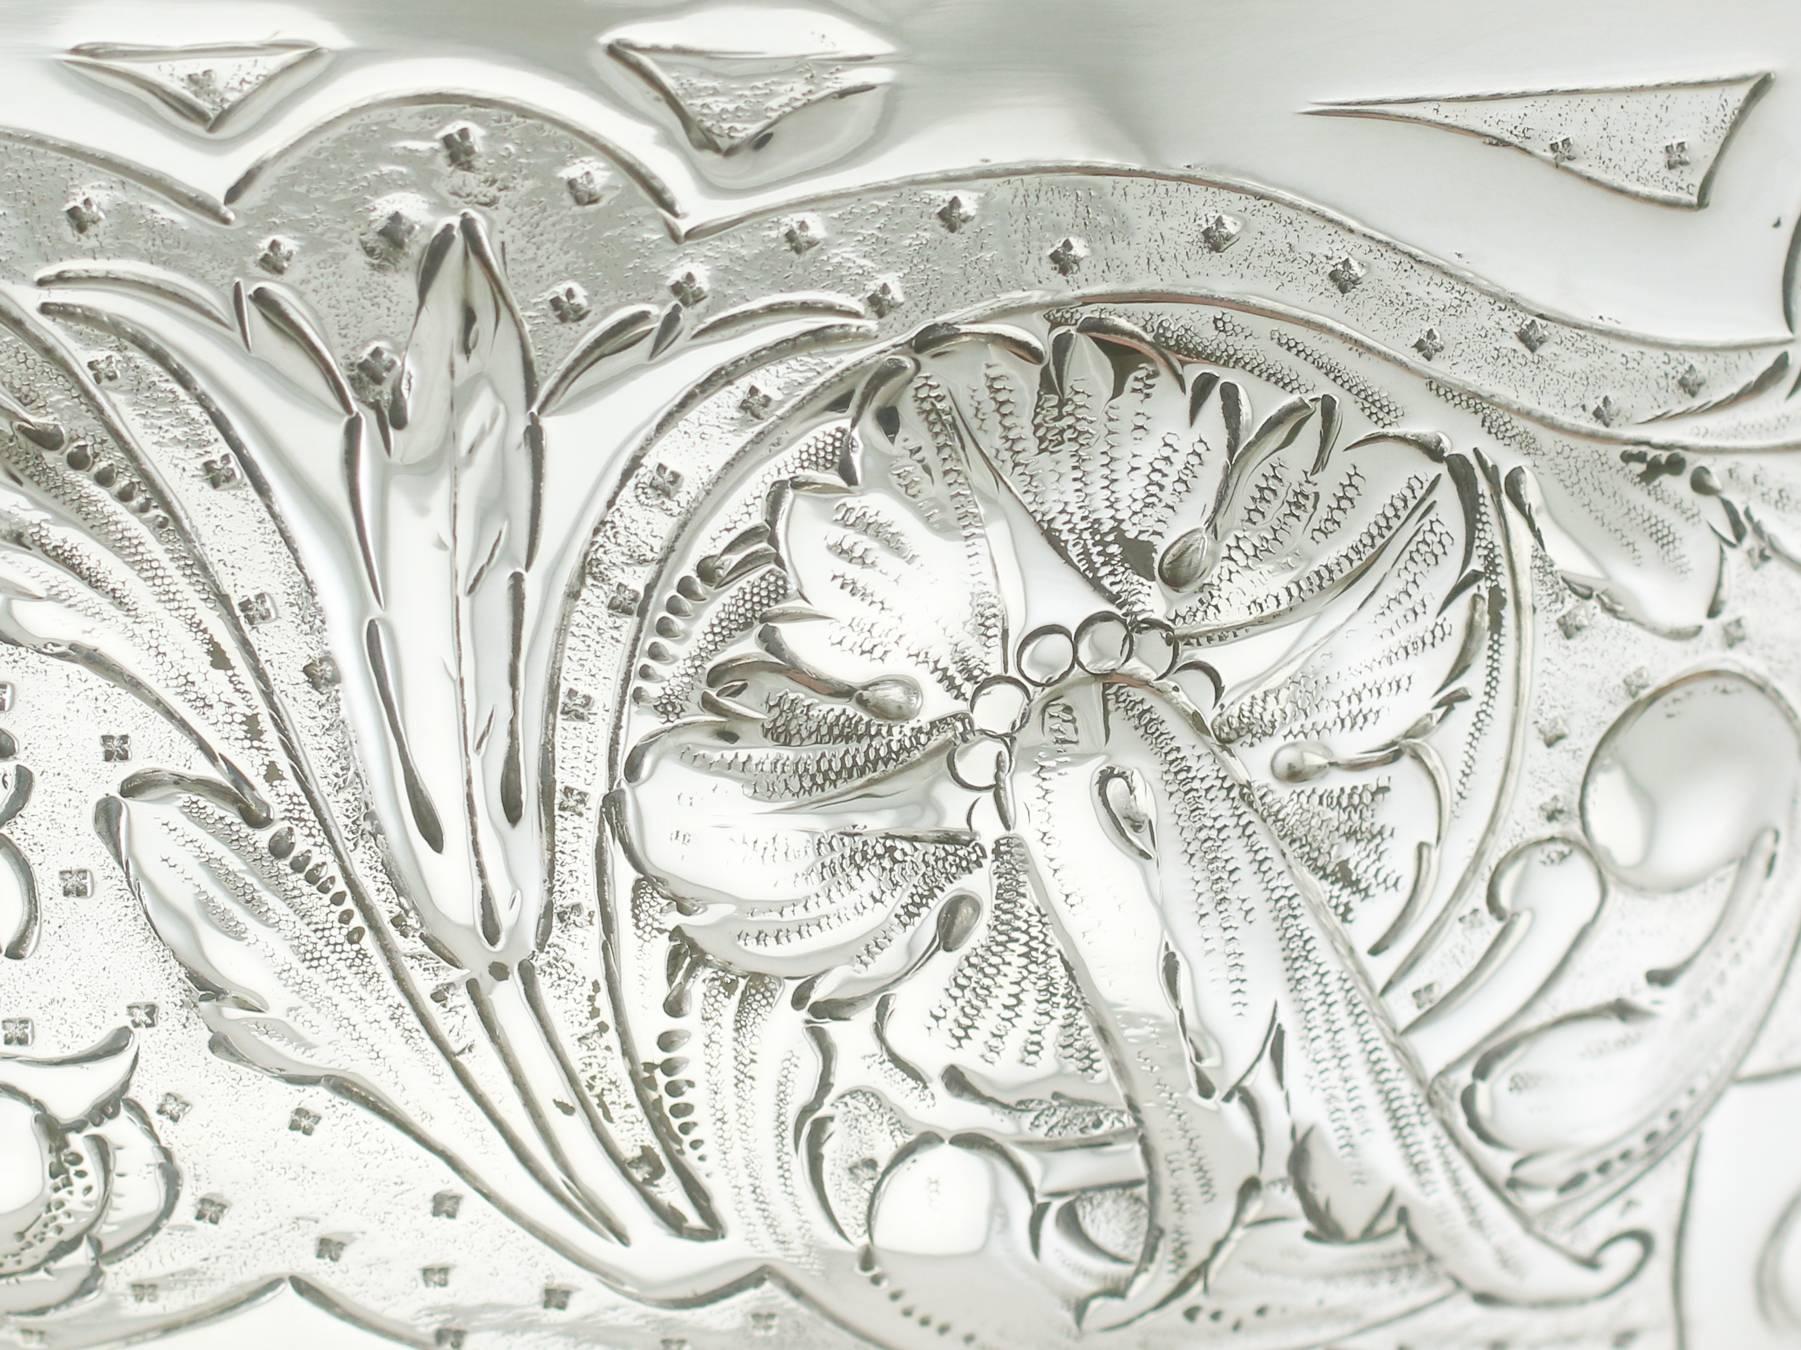 Early 20th Century Antique Edwardian Sterling Silver Presentation Bowl by James Deakin & Sons